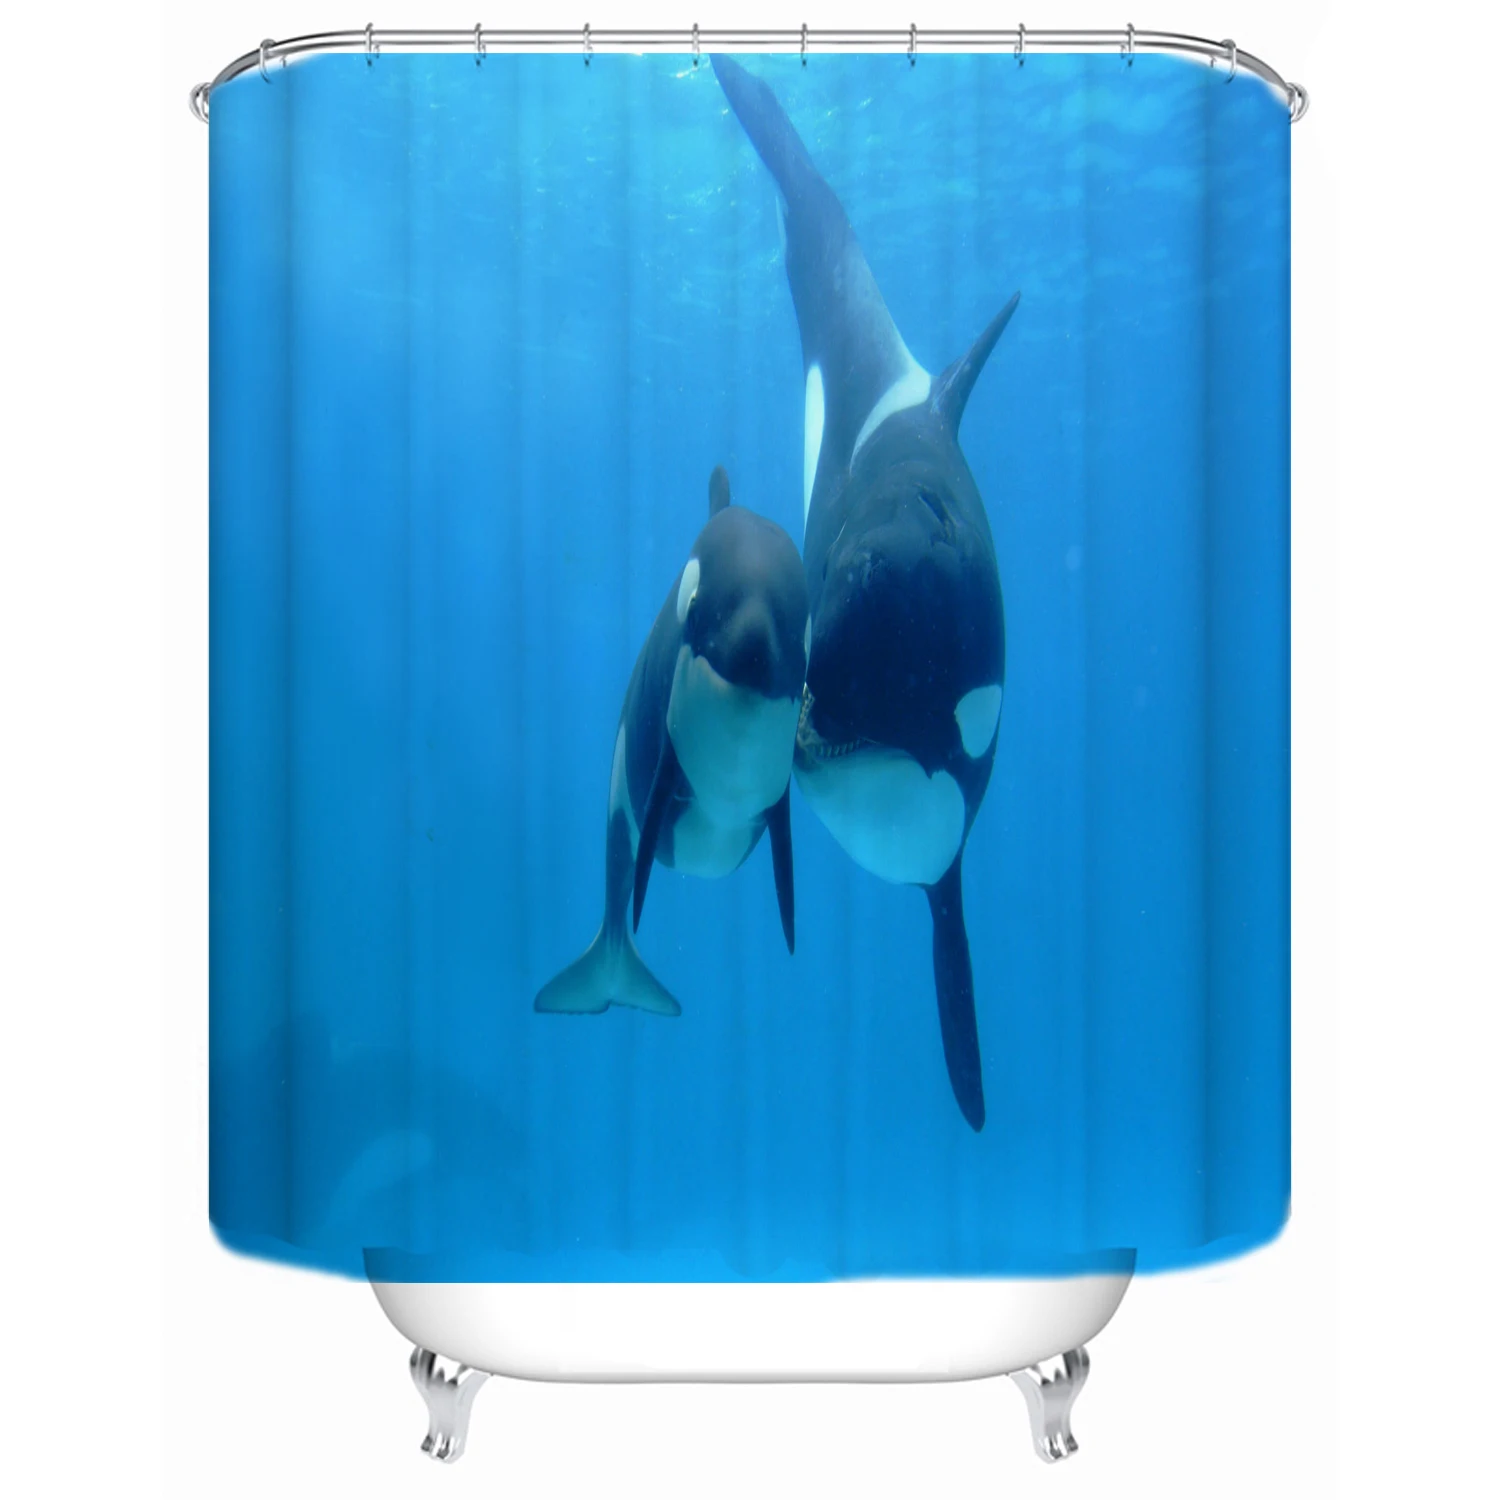 

Bathroom shower curtain partition bathtub waterproof shower curtain seabed killer whale custom printed shower curtain, Picture